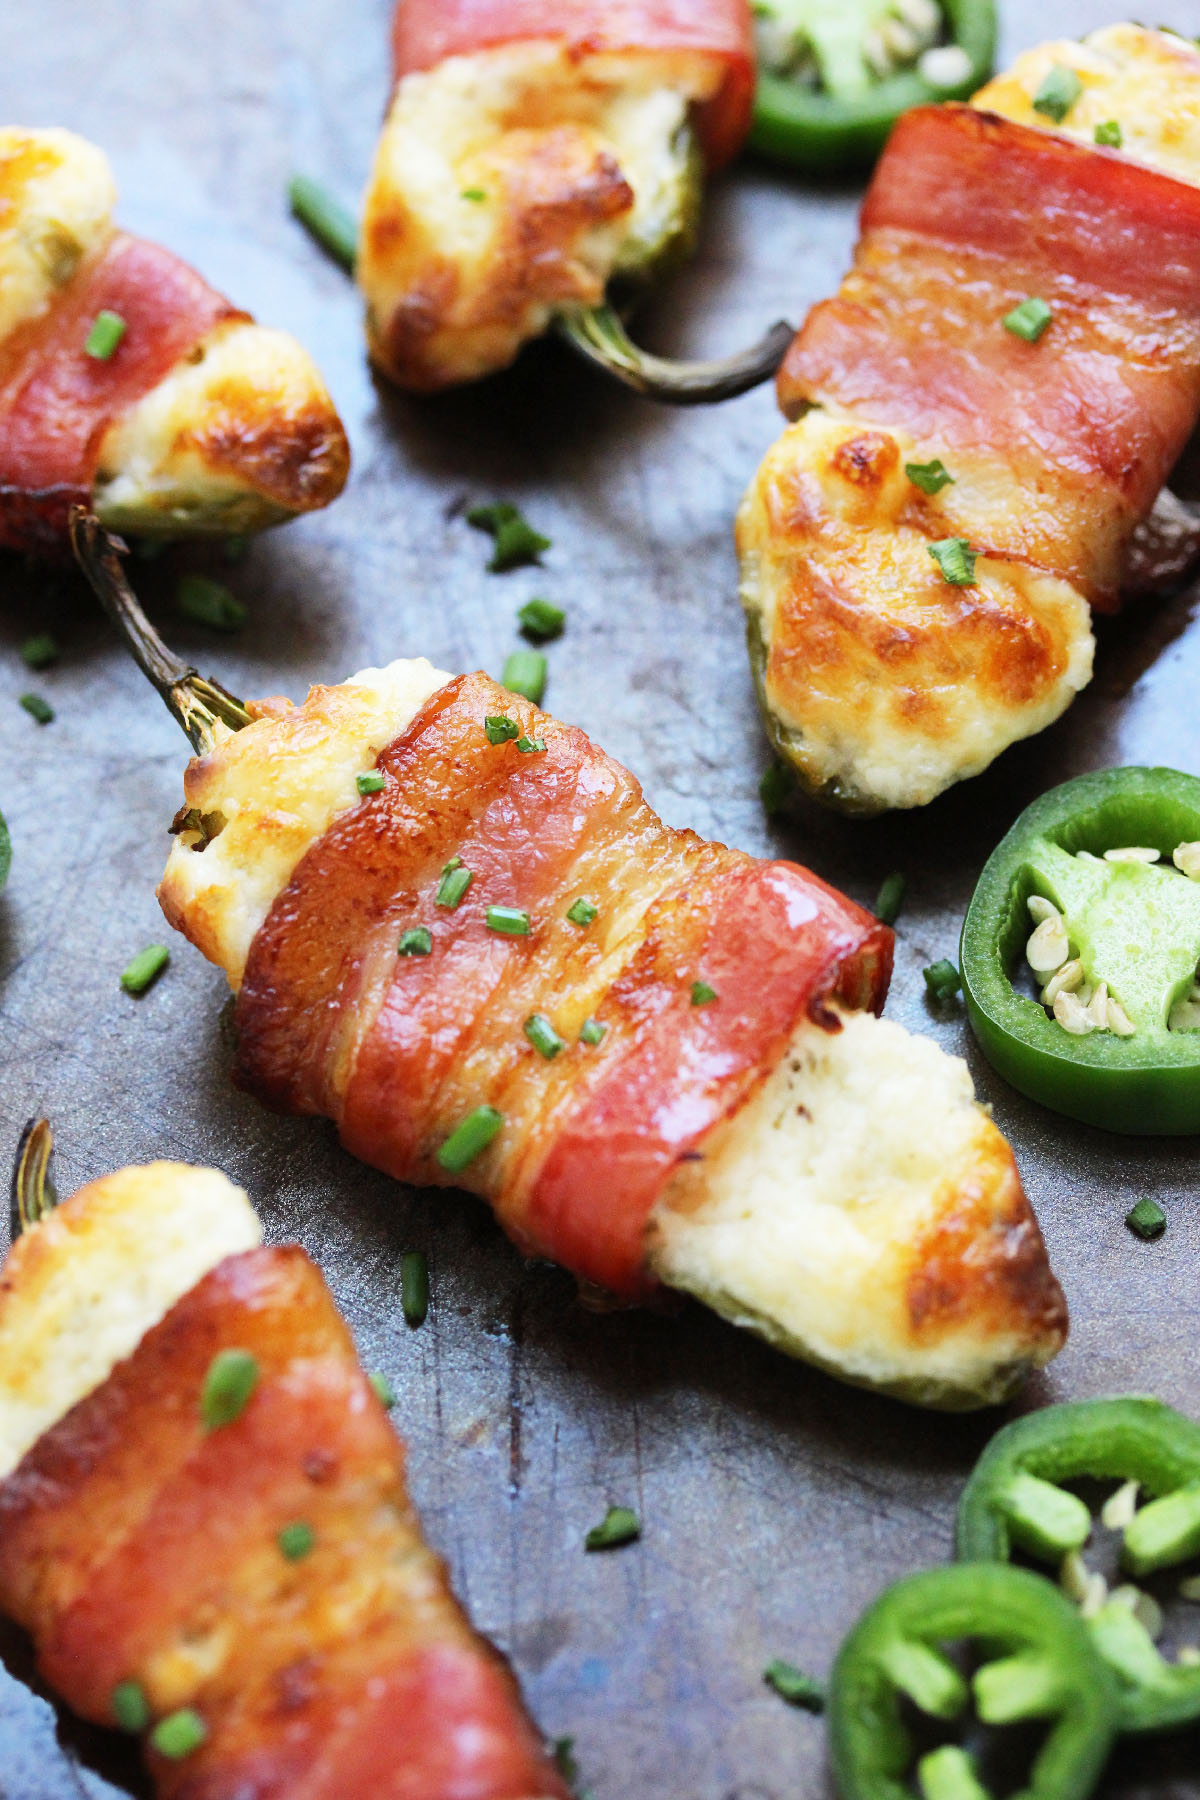 Check out 26 Ways To Love Bacon at https://homemaderecipes.com/national-bacon-lovers-day/